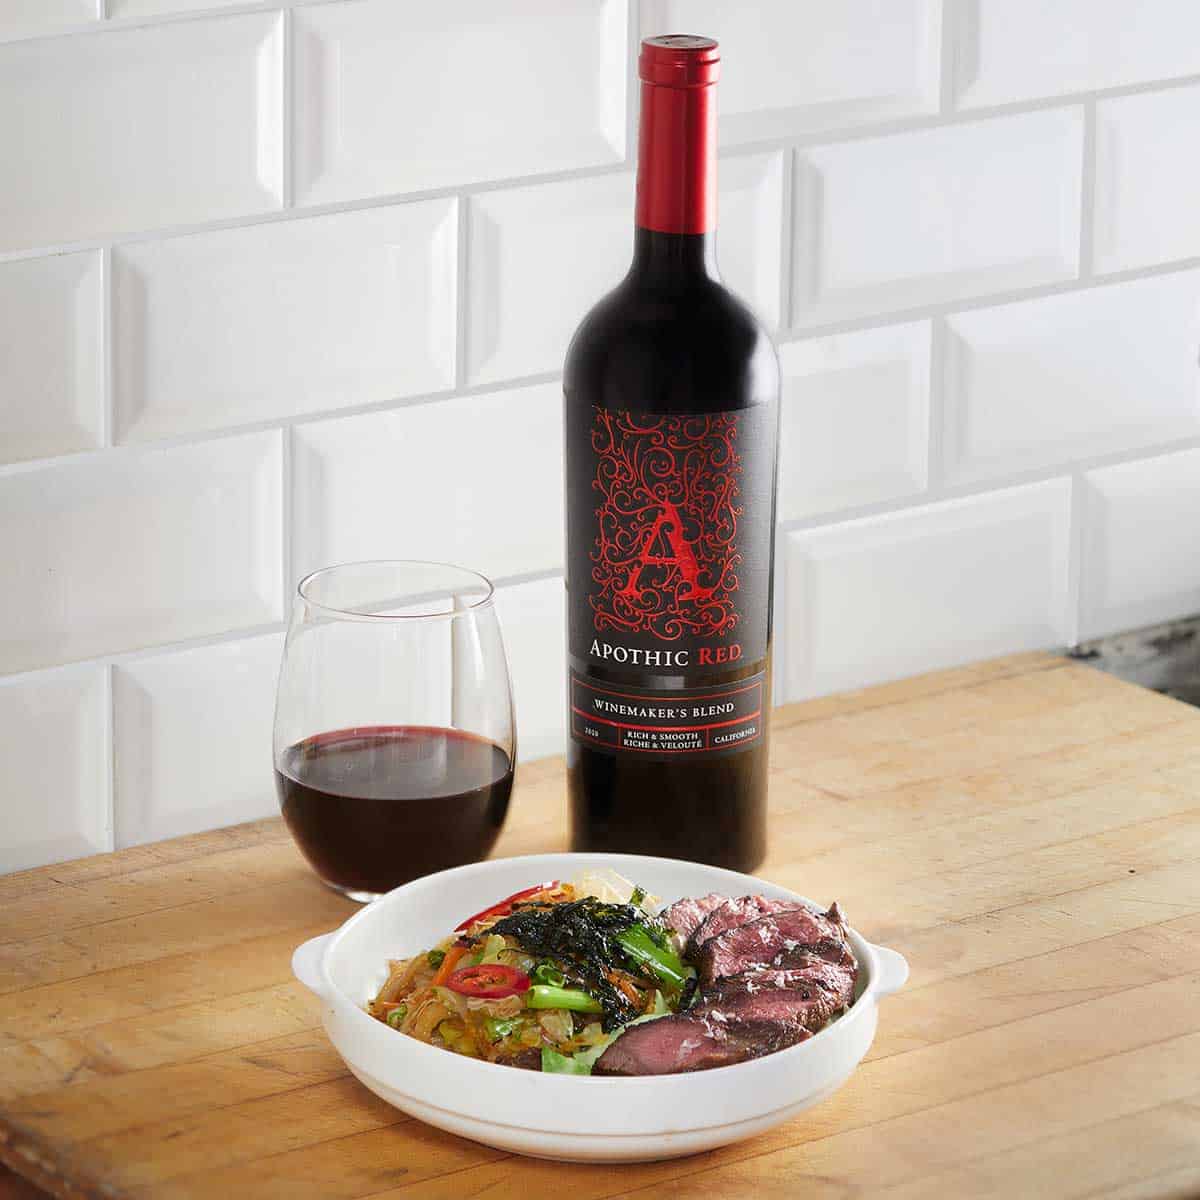 A yaki udon bowl in front of a glass and a bottle of Apothic Red